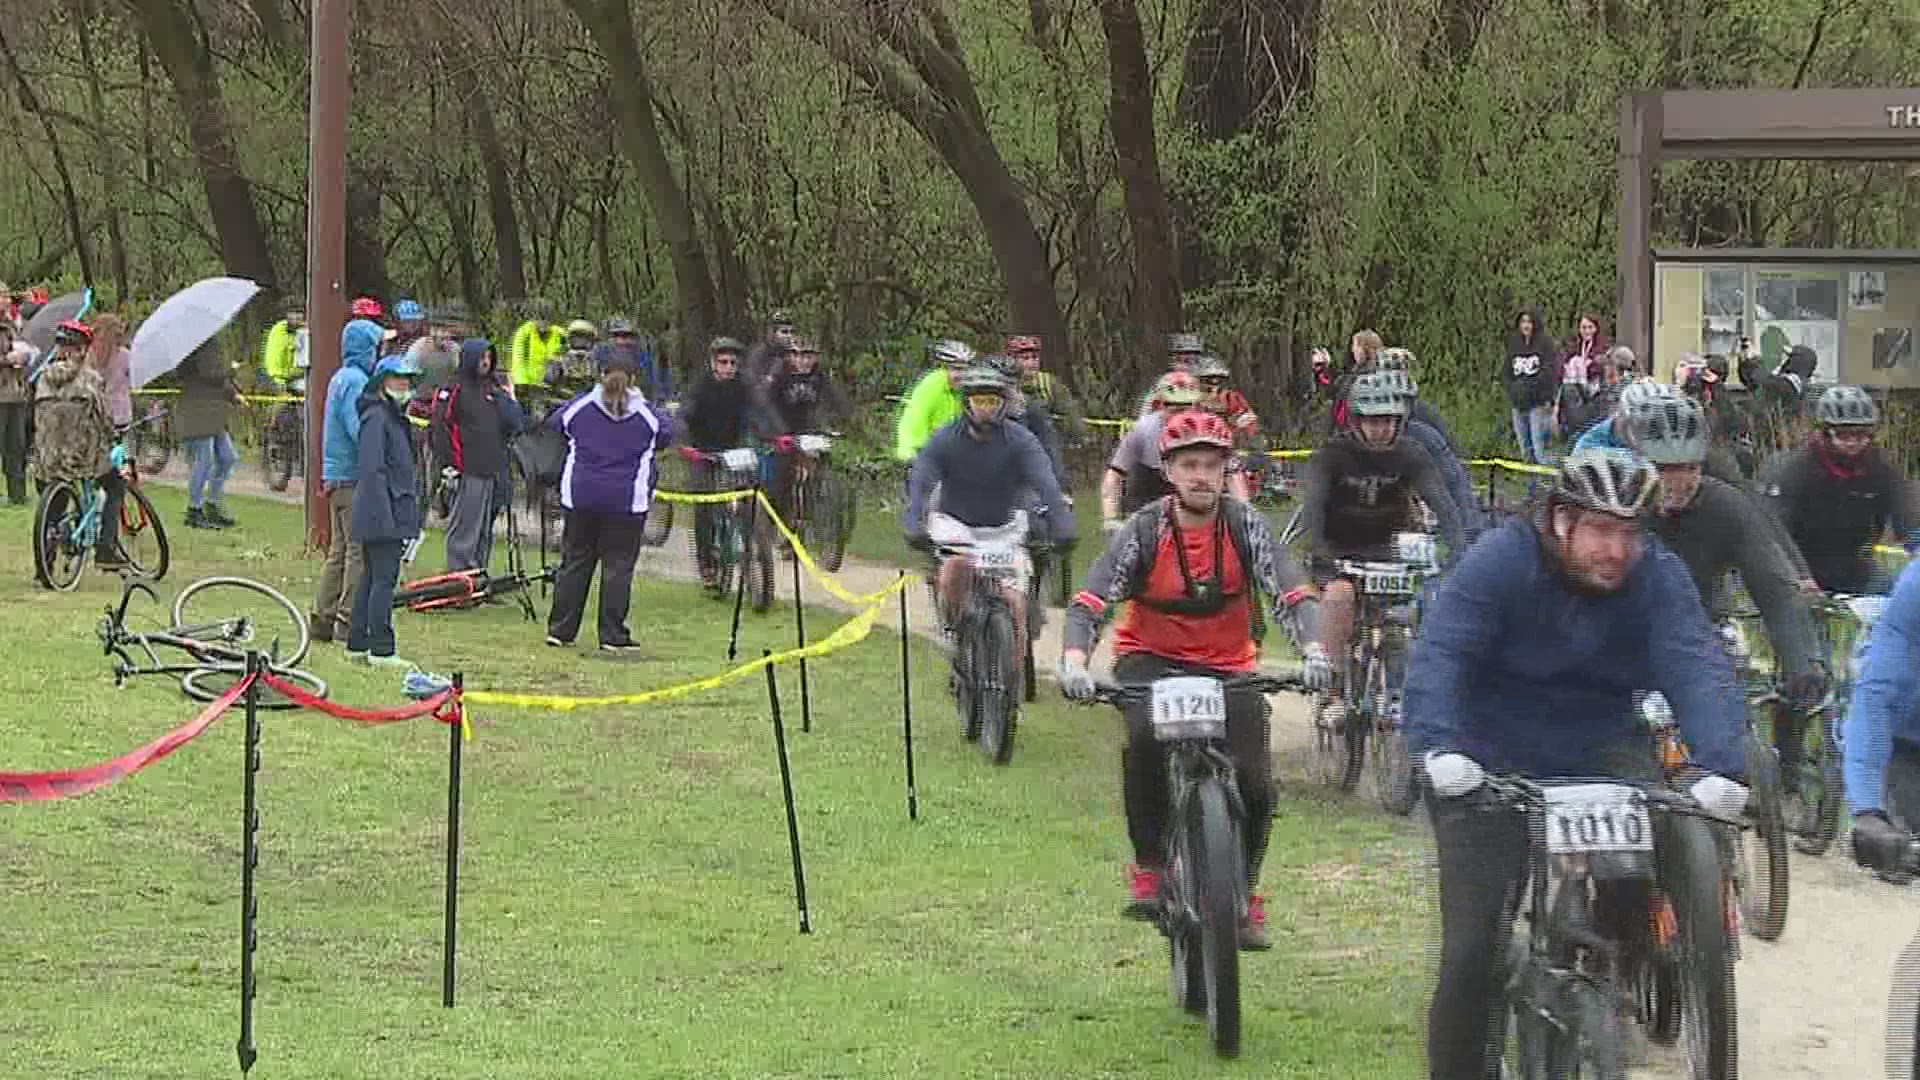 Mountain bike racing is back at Sylvan Island. The race in 2020 was cancelled because of the pandemic, and riders were excited to hit the trails again.